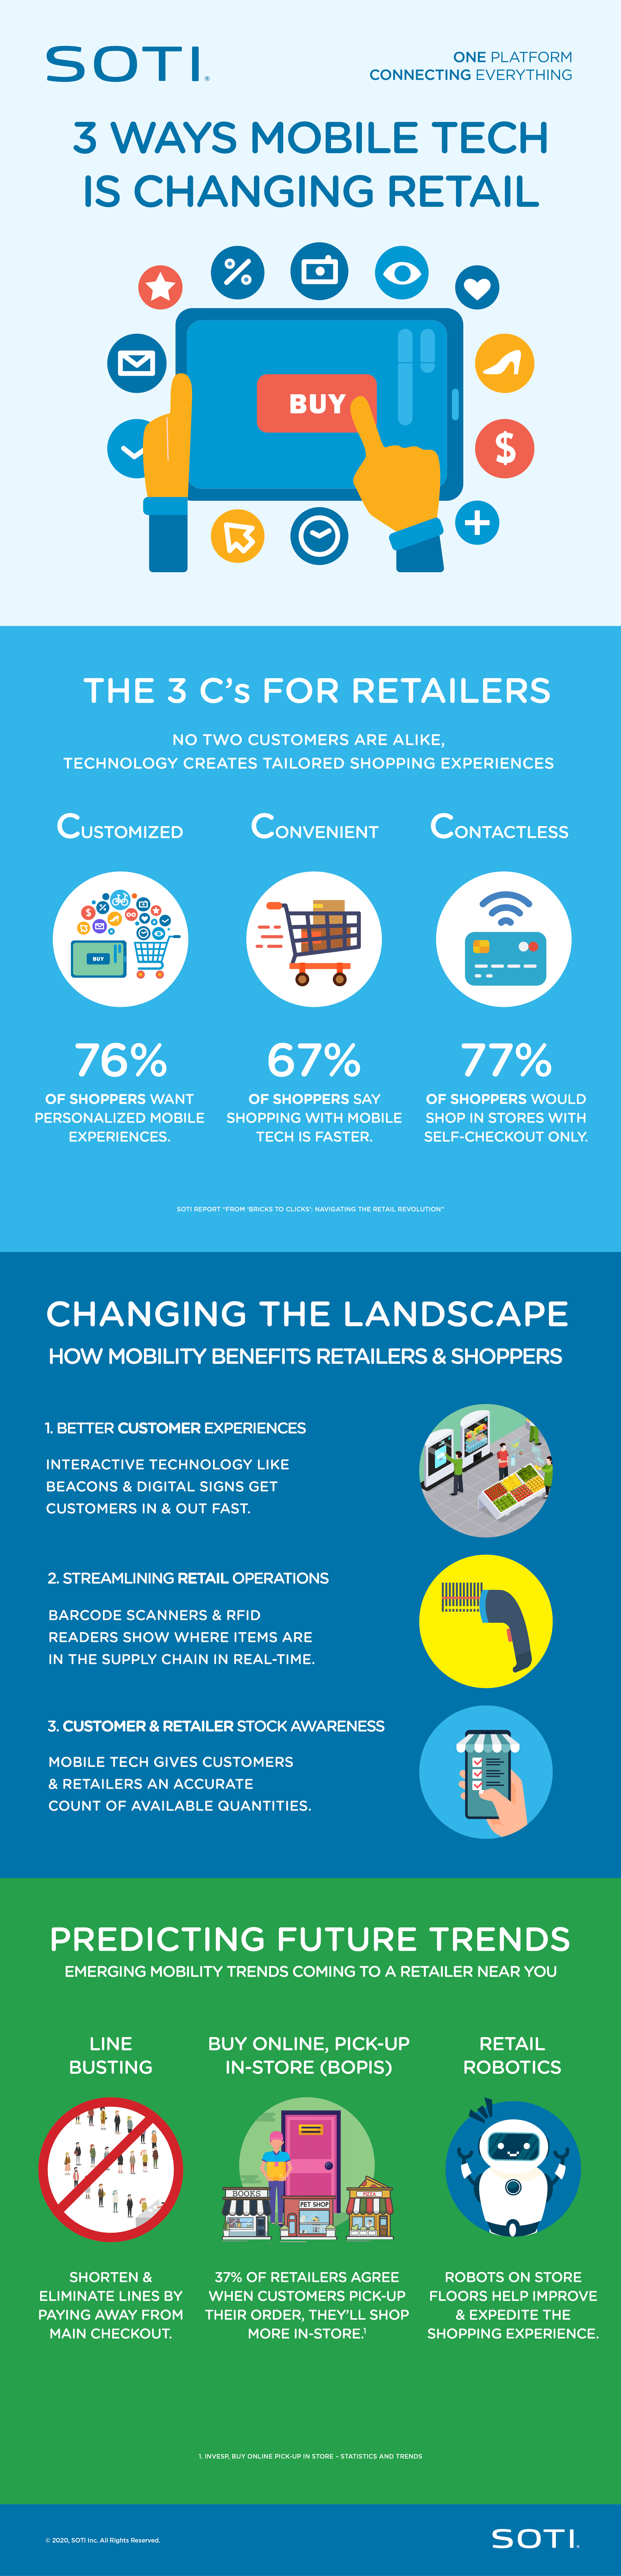 3 Ways Mobile Tech Is Changing Retail Infographic from SOTI